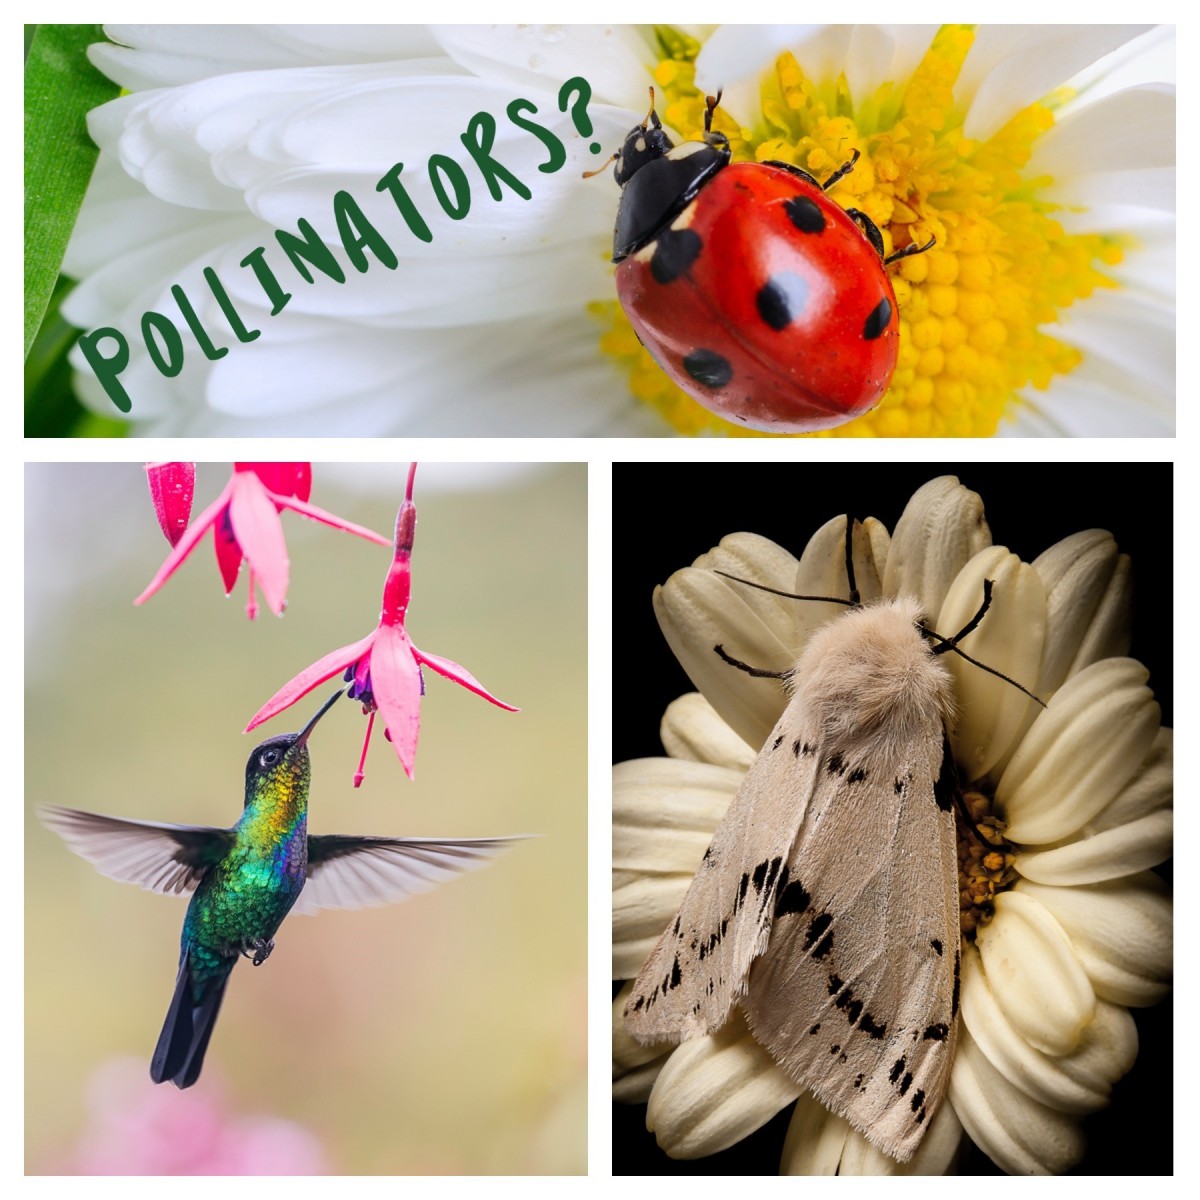 pollinator - lady bug on a daisy, a humming bird taking nectar from a pink flower and a beige moth on a beige flower